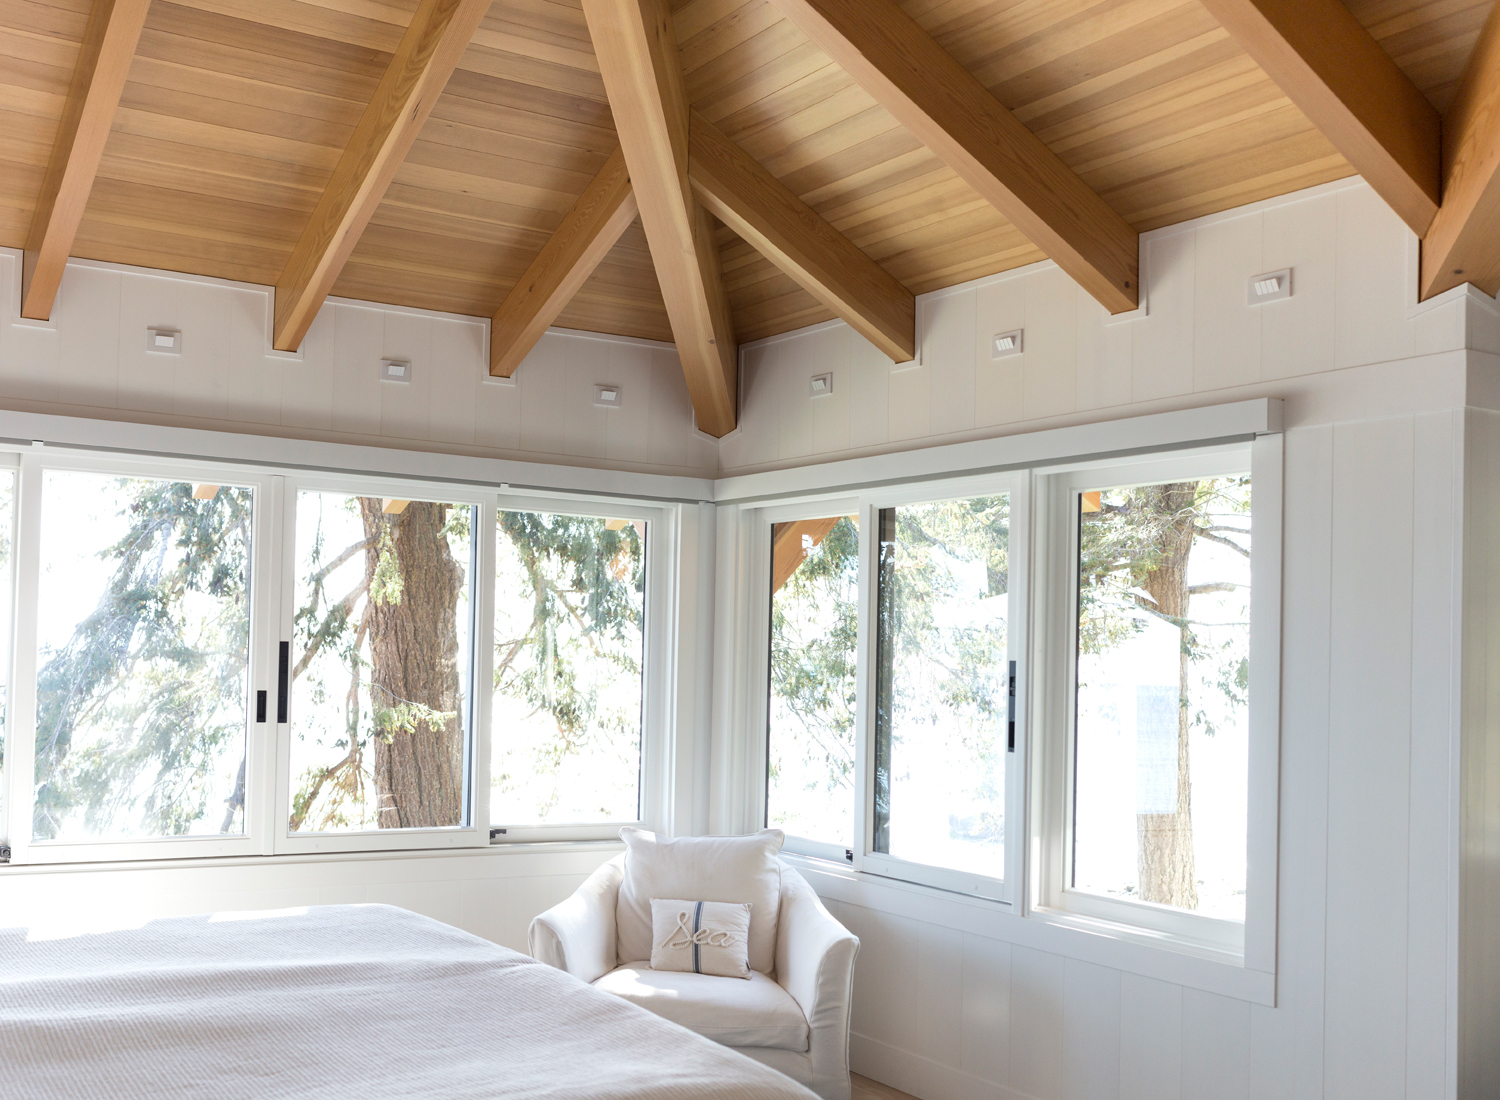 white wooden bedroom walls painted white with large windows